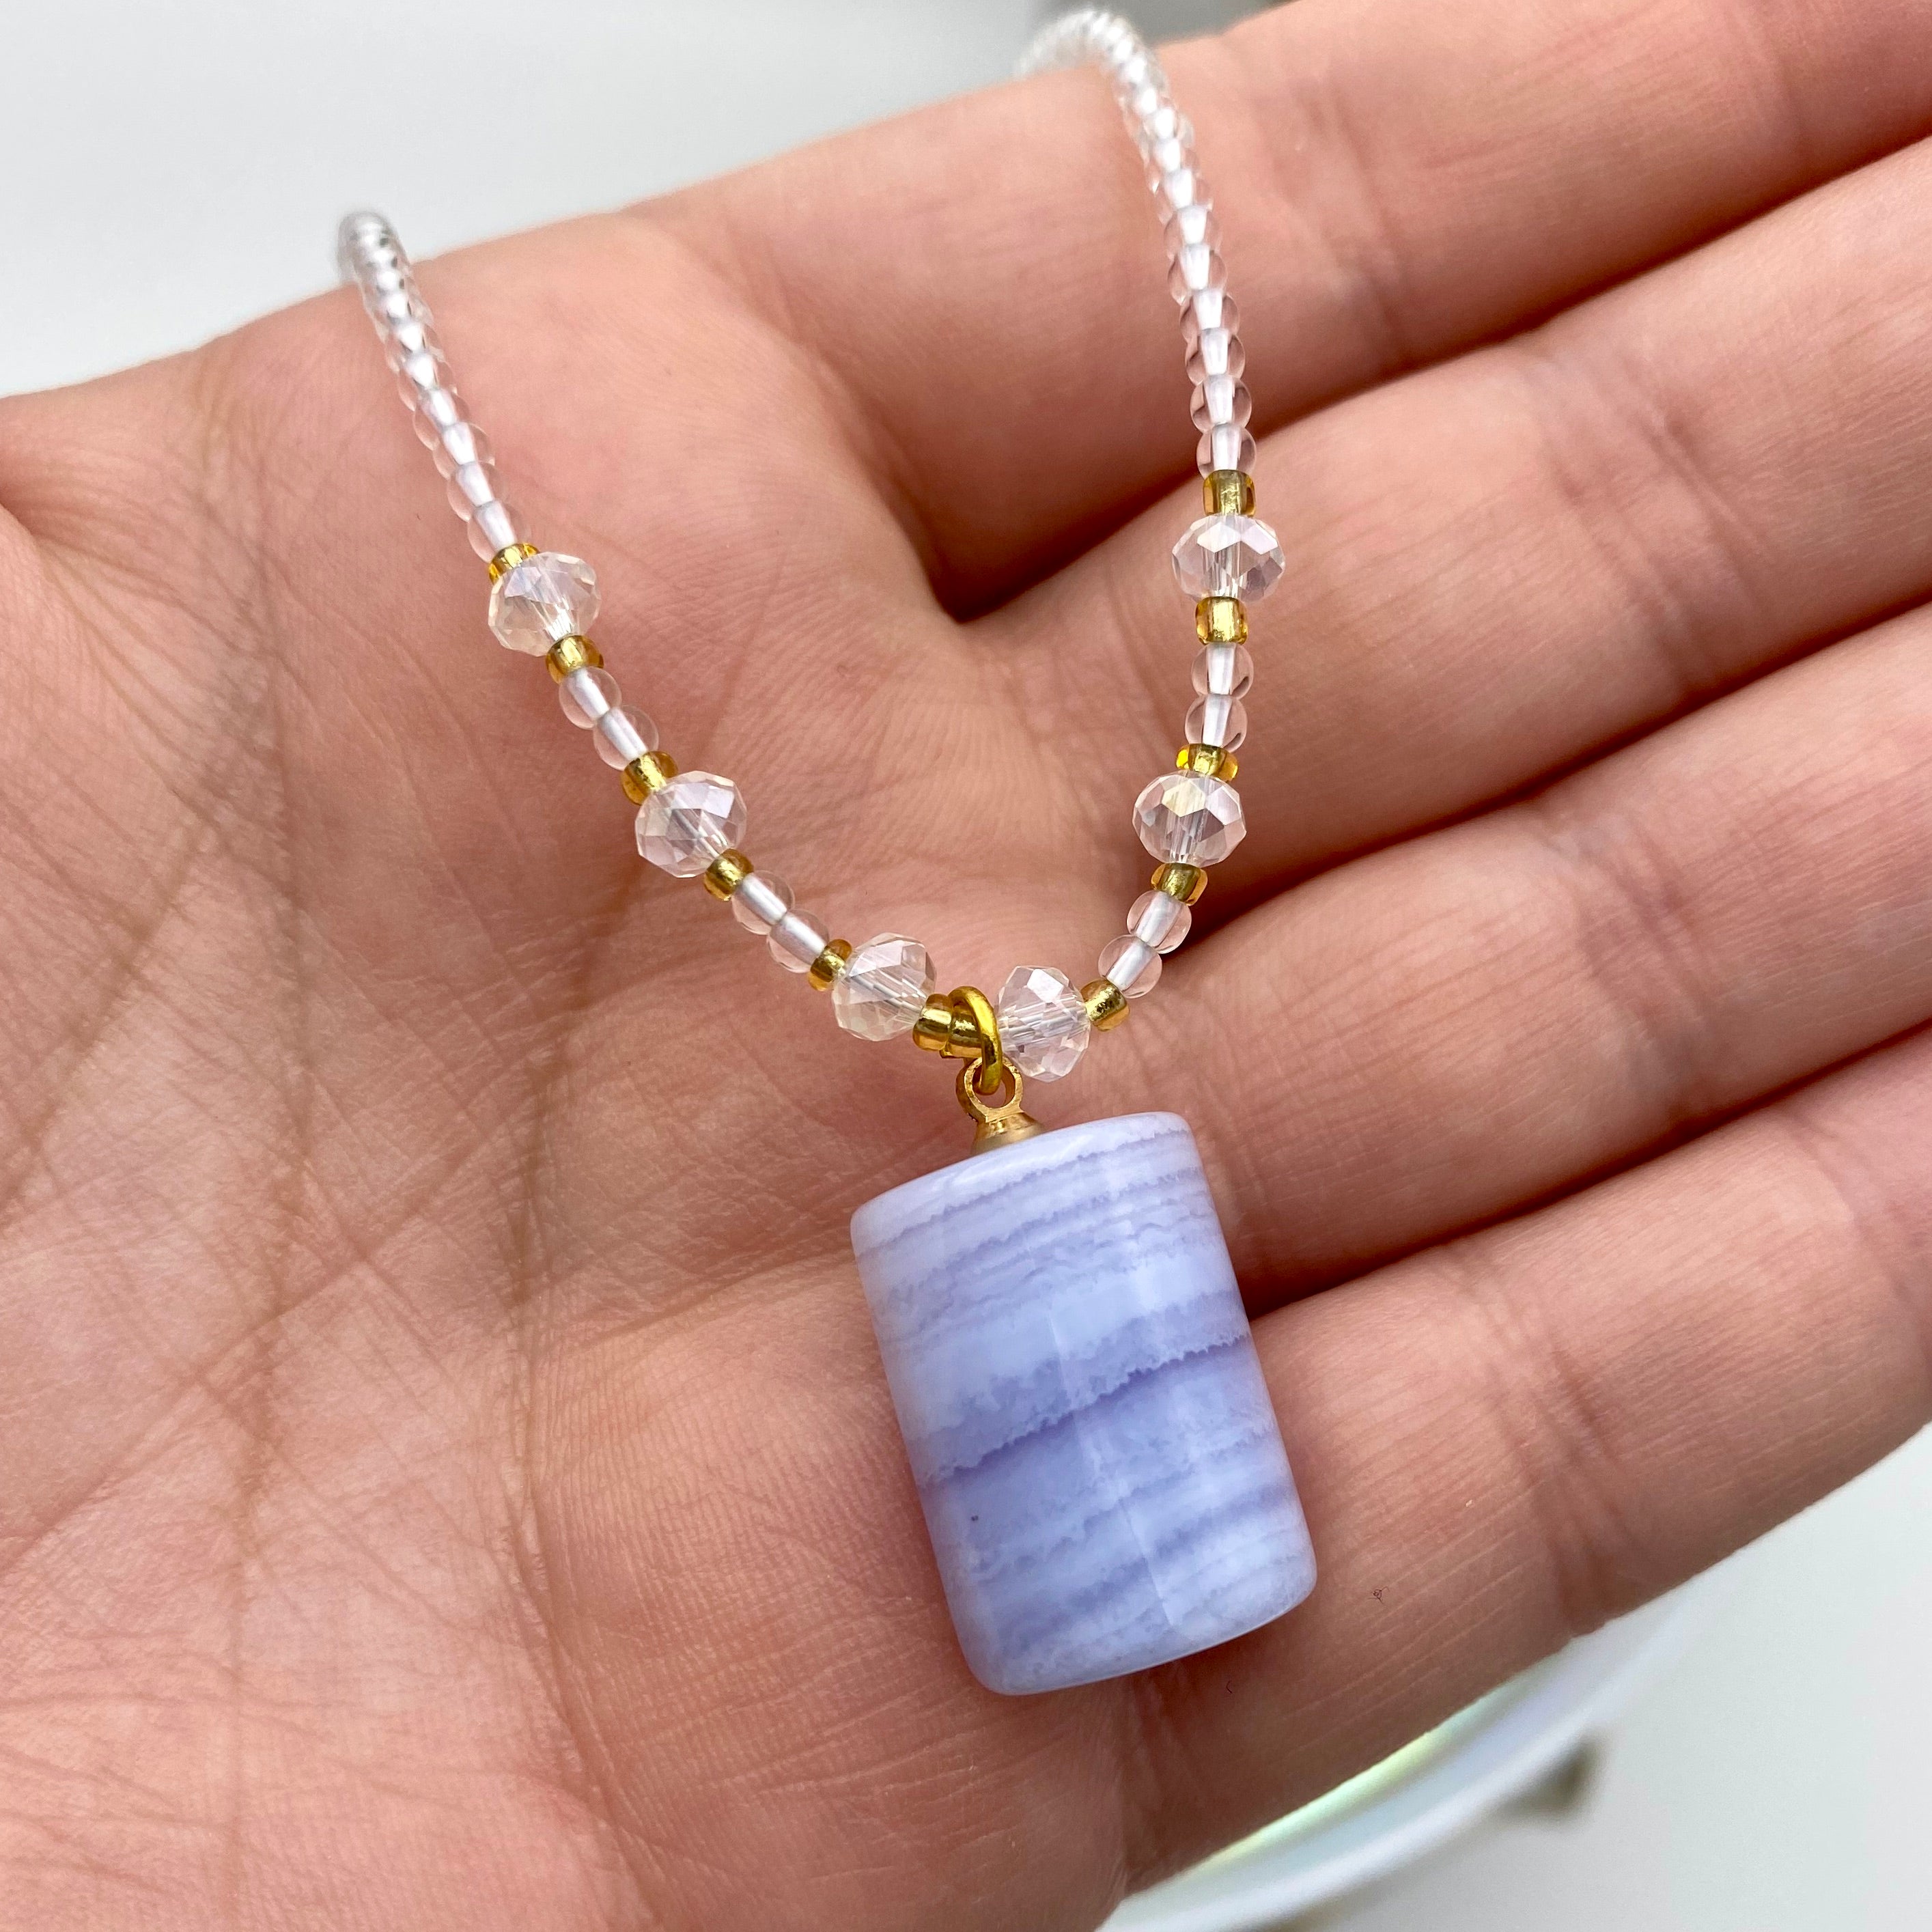 Buy Lace Agate Necklace, Blue Lace Agate Pendant, Free Form Gemstone  Necklace, Unique Lace Agate Necklace, Healing Crystal, Gemstone Appeal, GSA  Online in India - Etsy